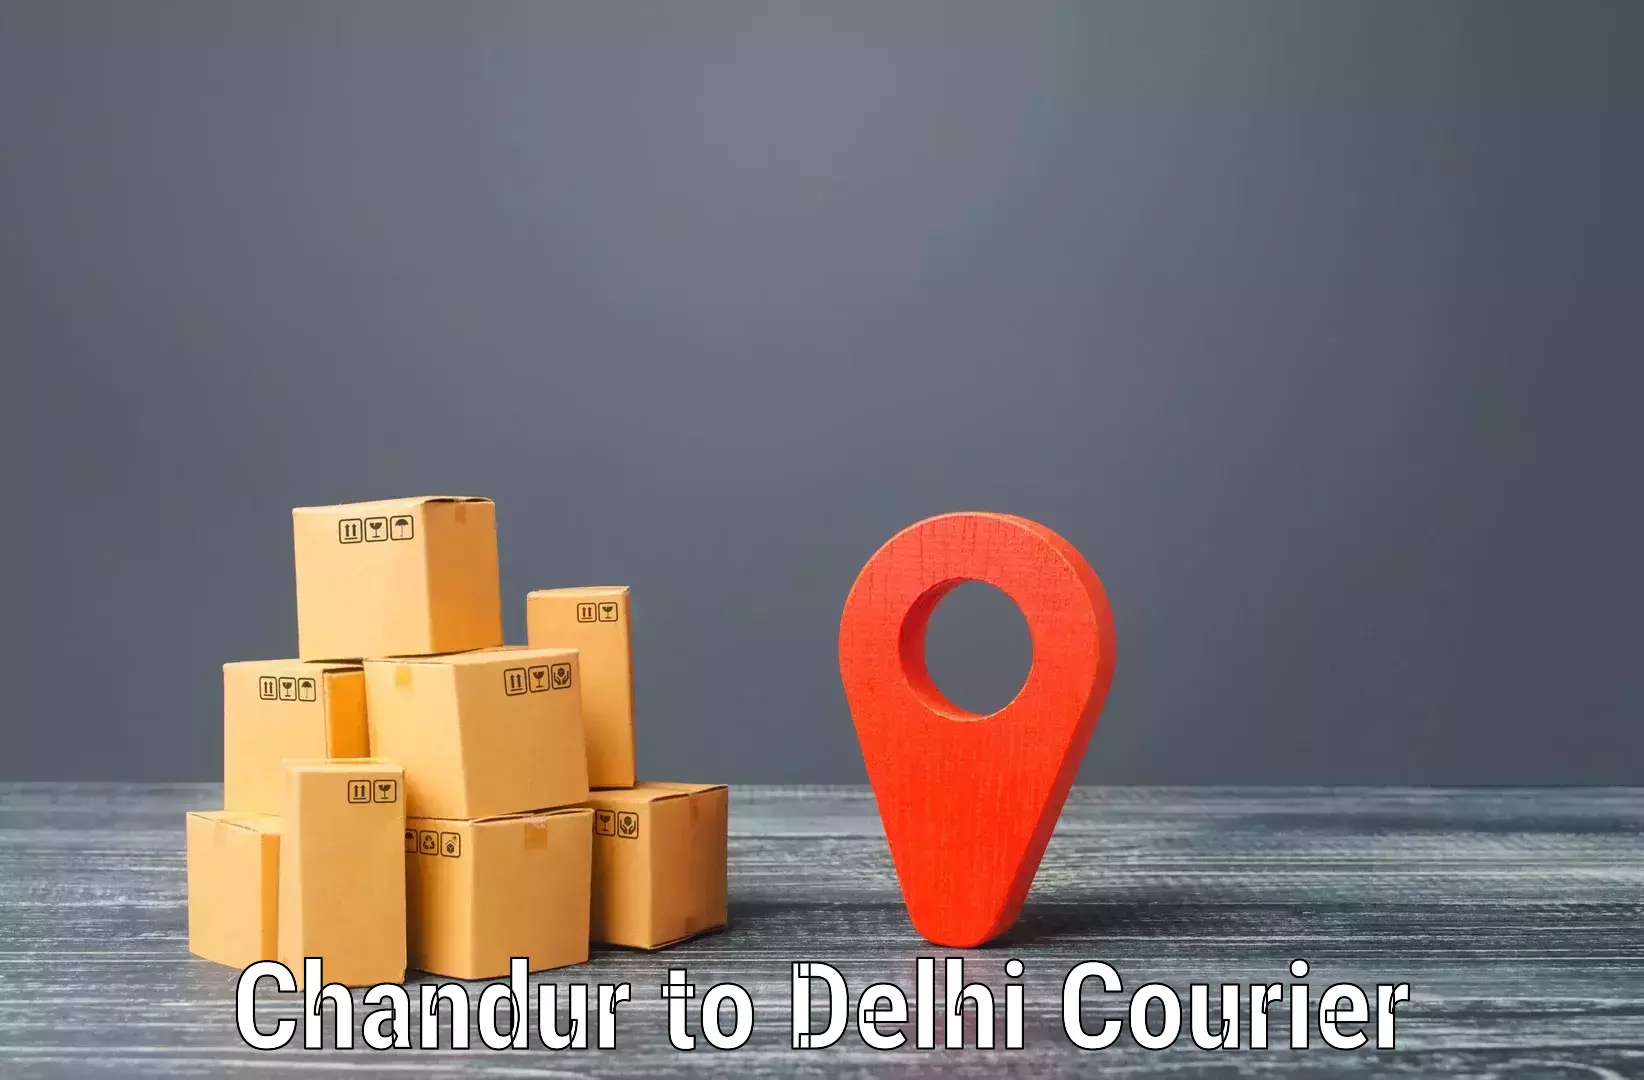 Automated parcel services Chandur to NCR